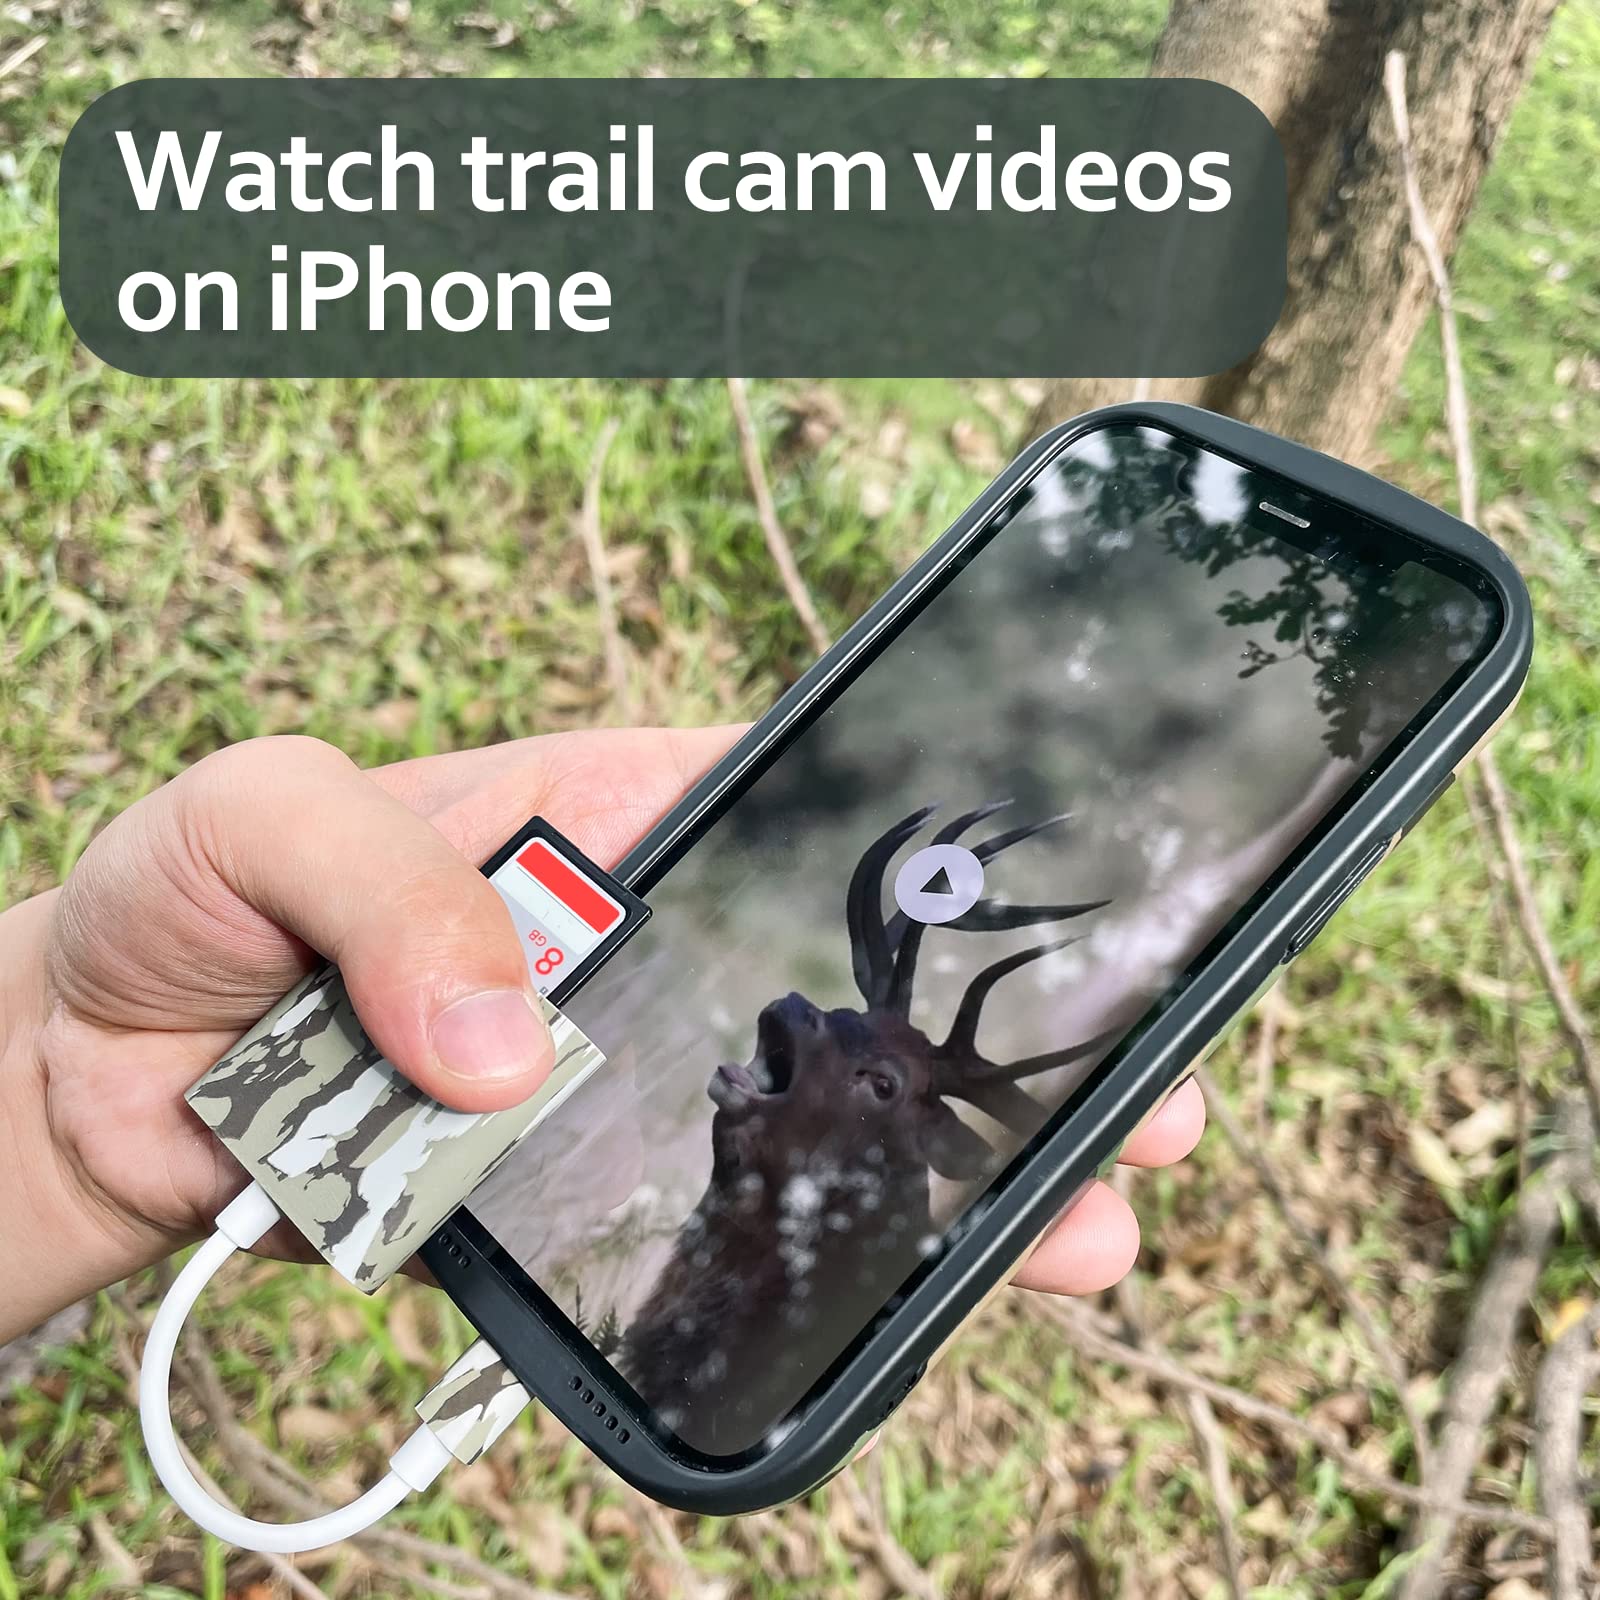 Trail Camera Viewer, Deer Hunting Accessories, Plug & Play SD Card Viewer for Hunters to View Images and Videos from Game Camera for iPhone